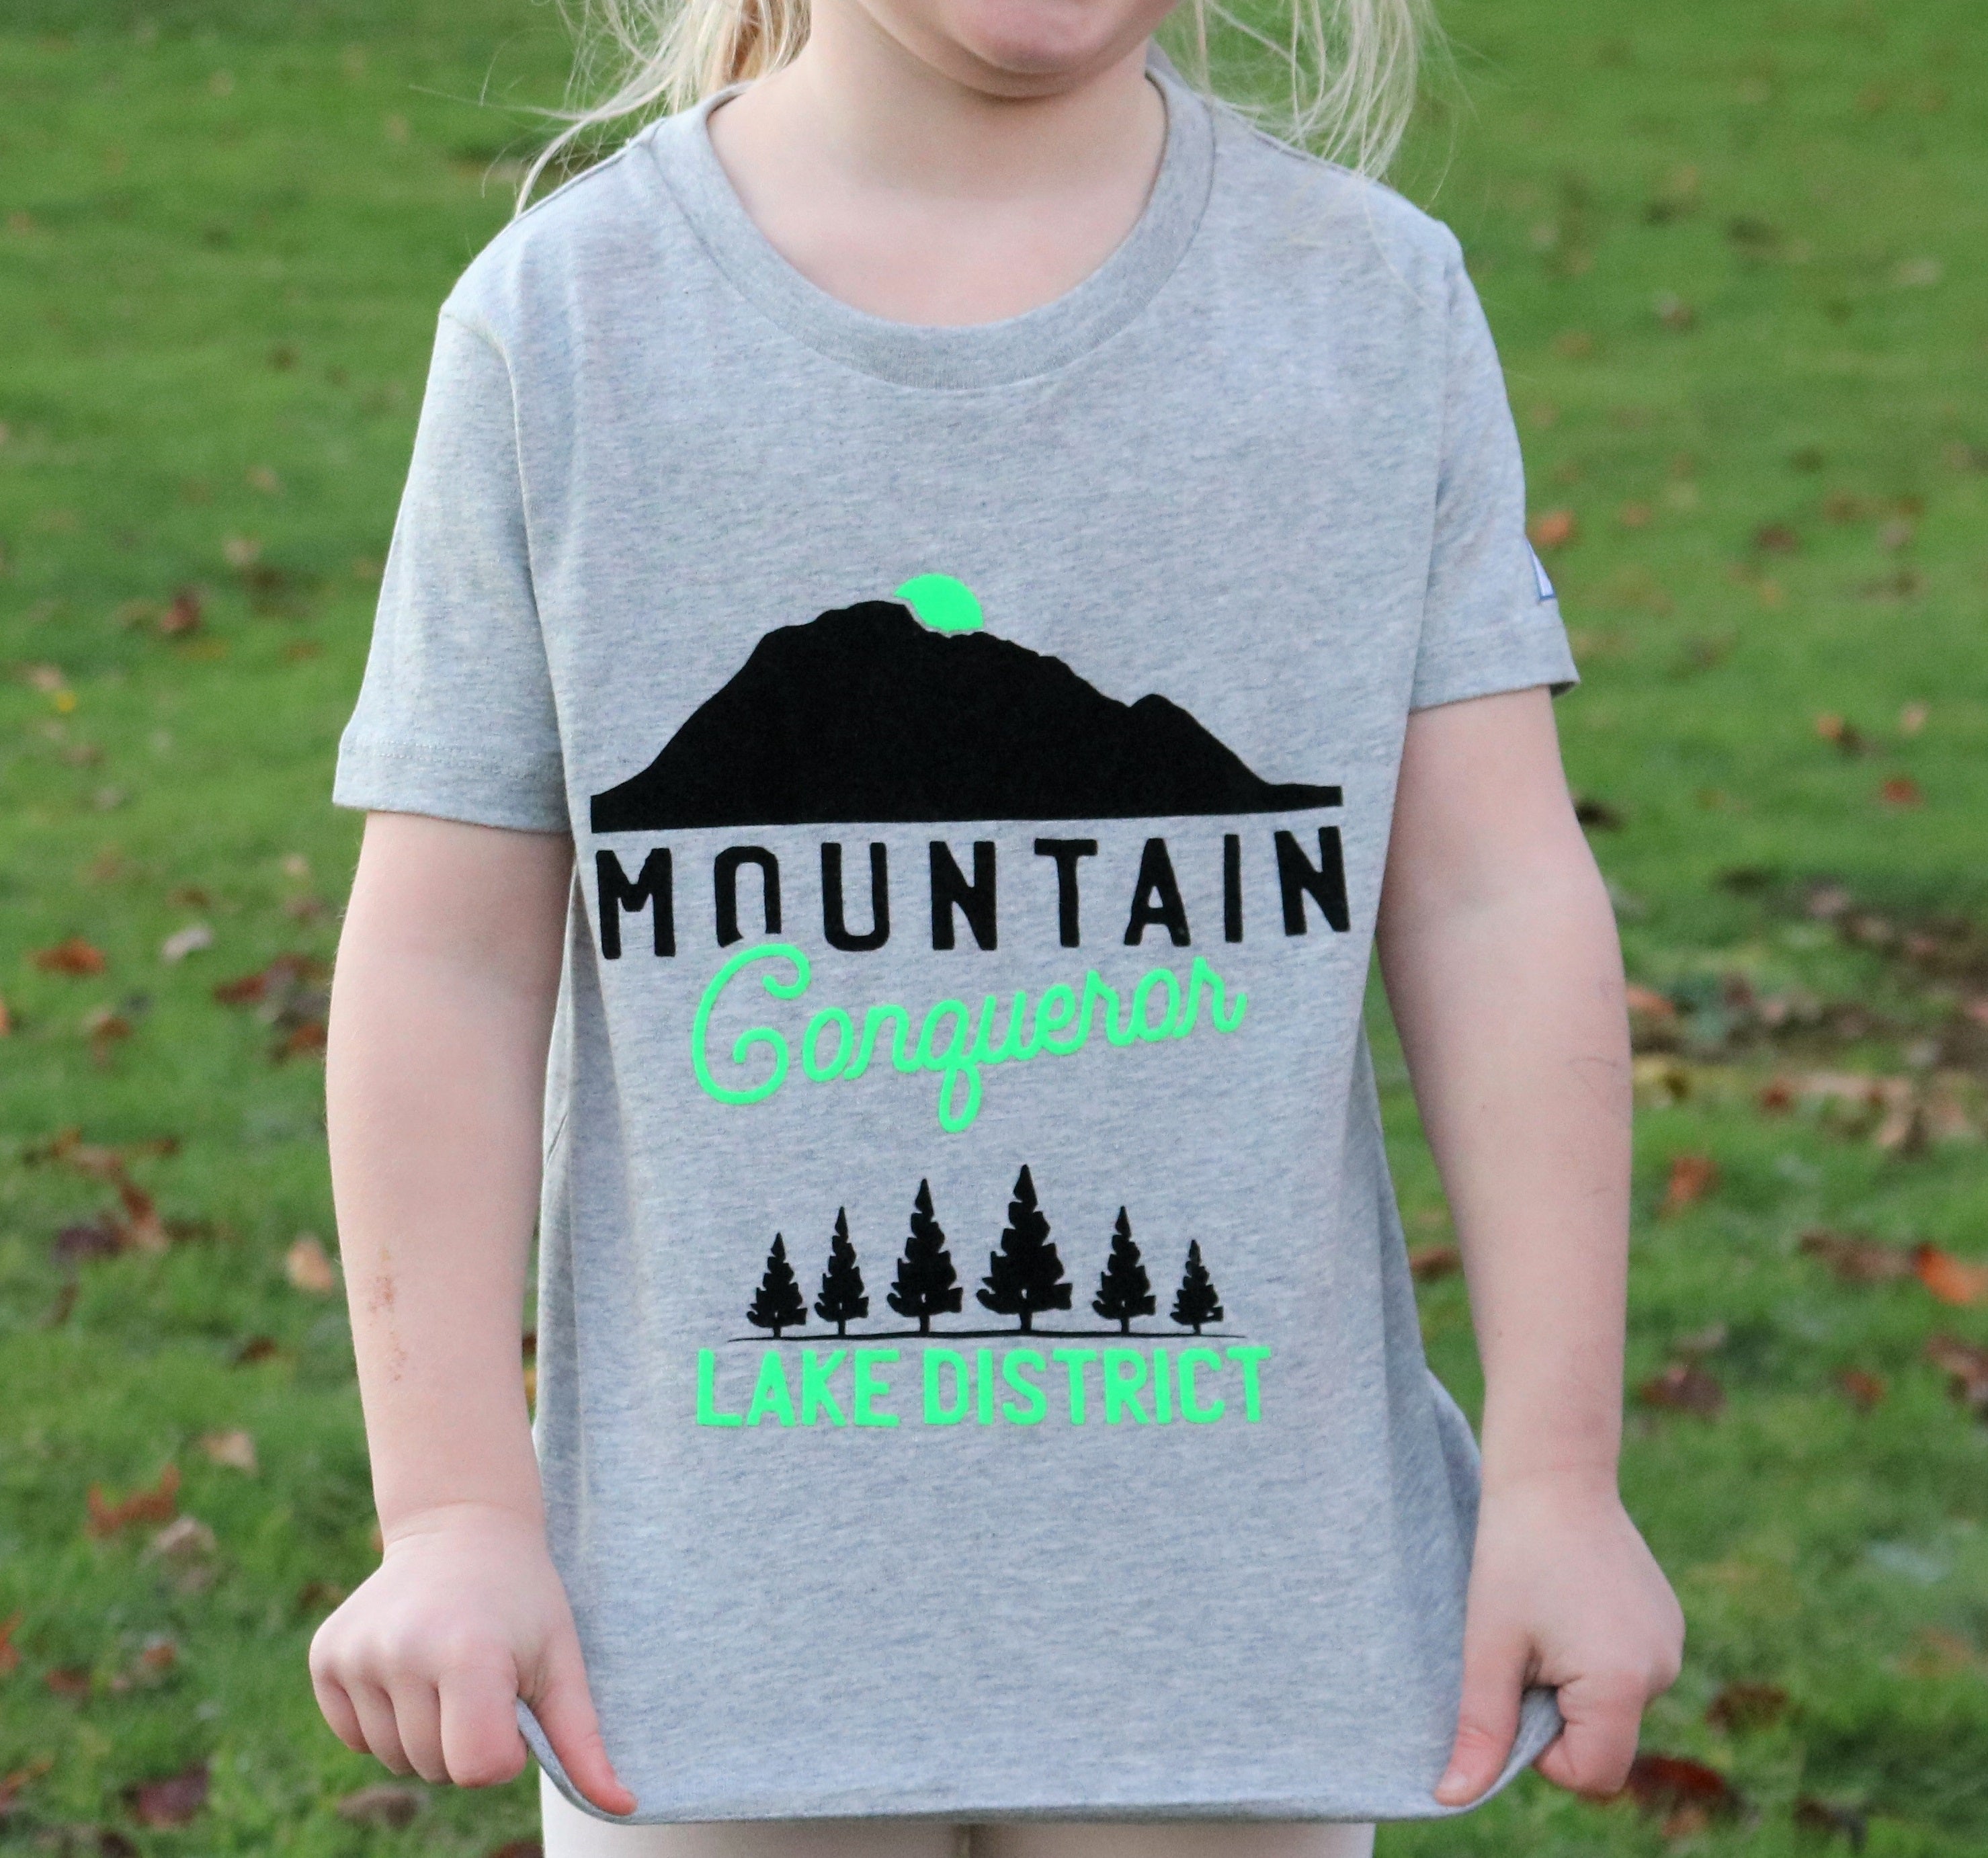 Peaks in Profile Childs T-shirt